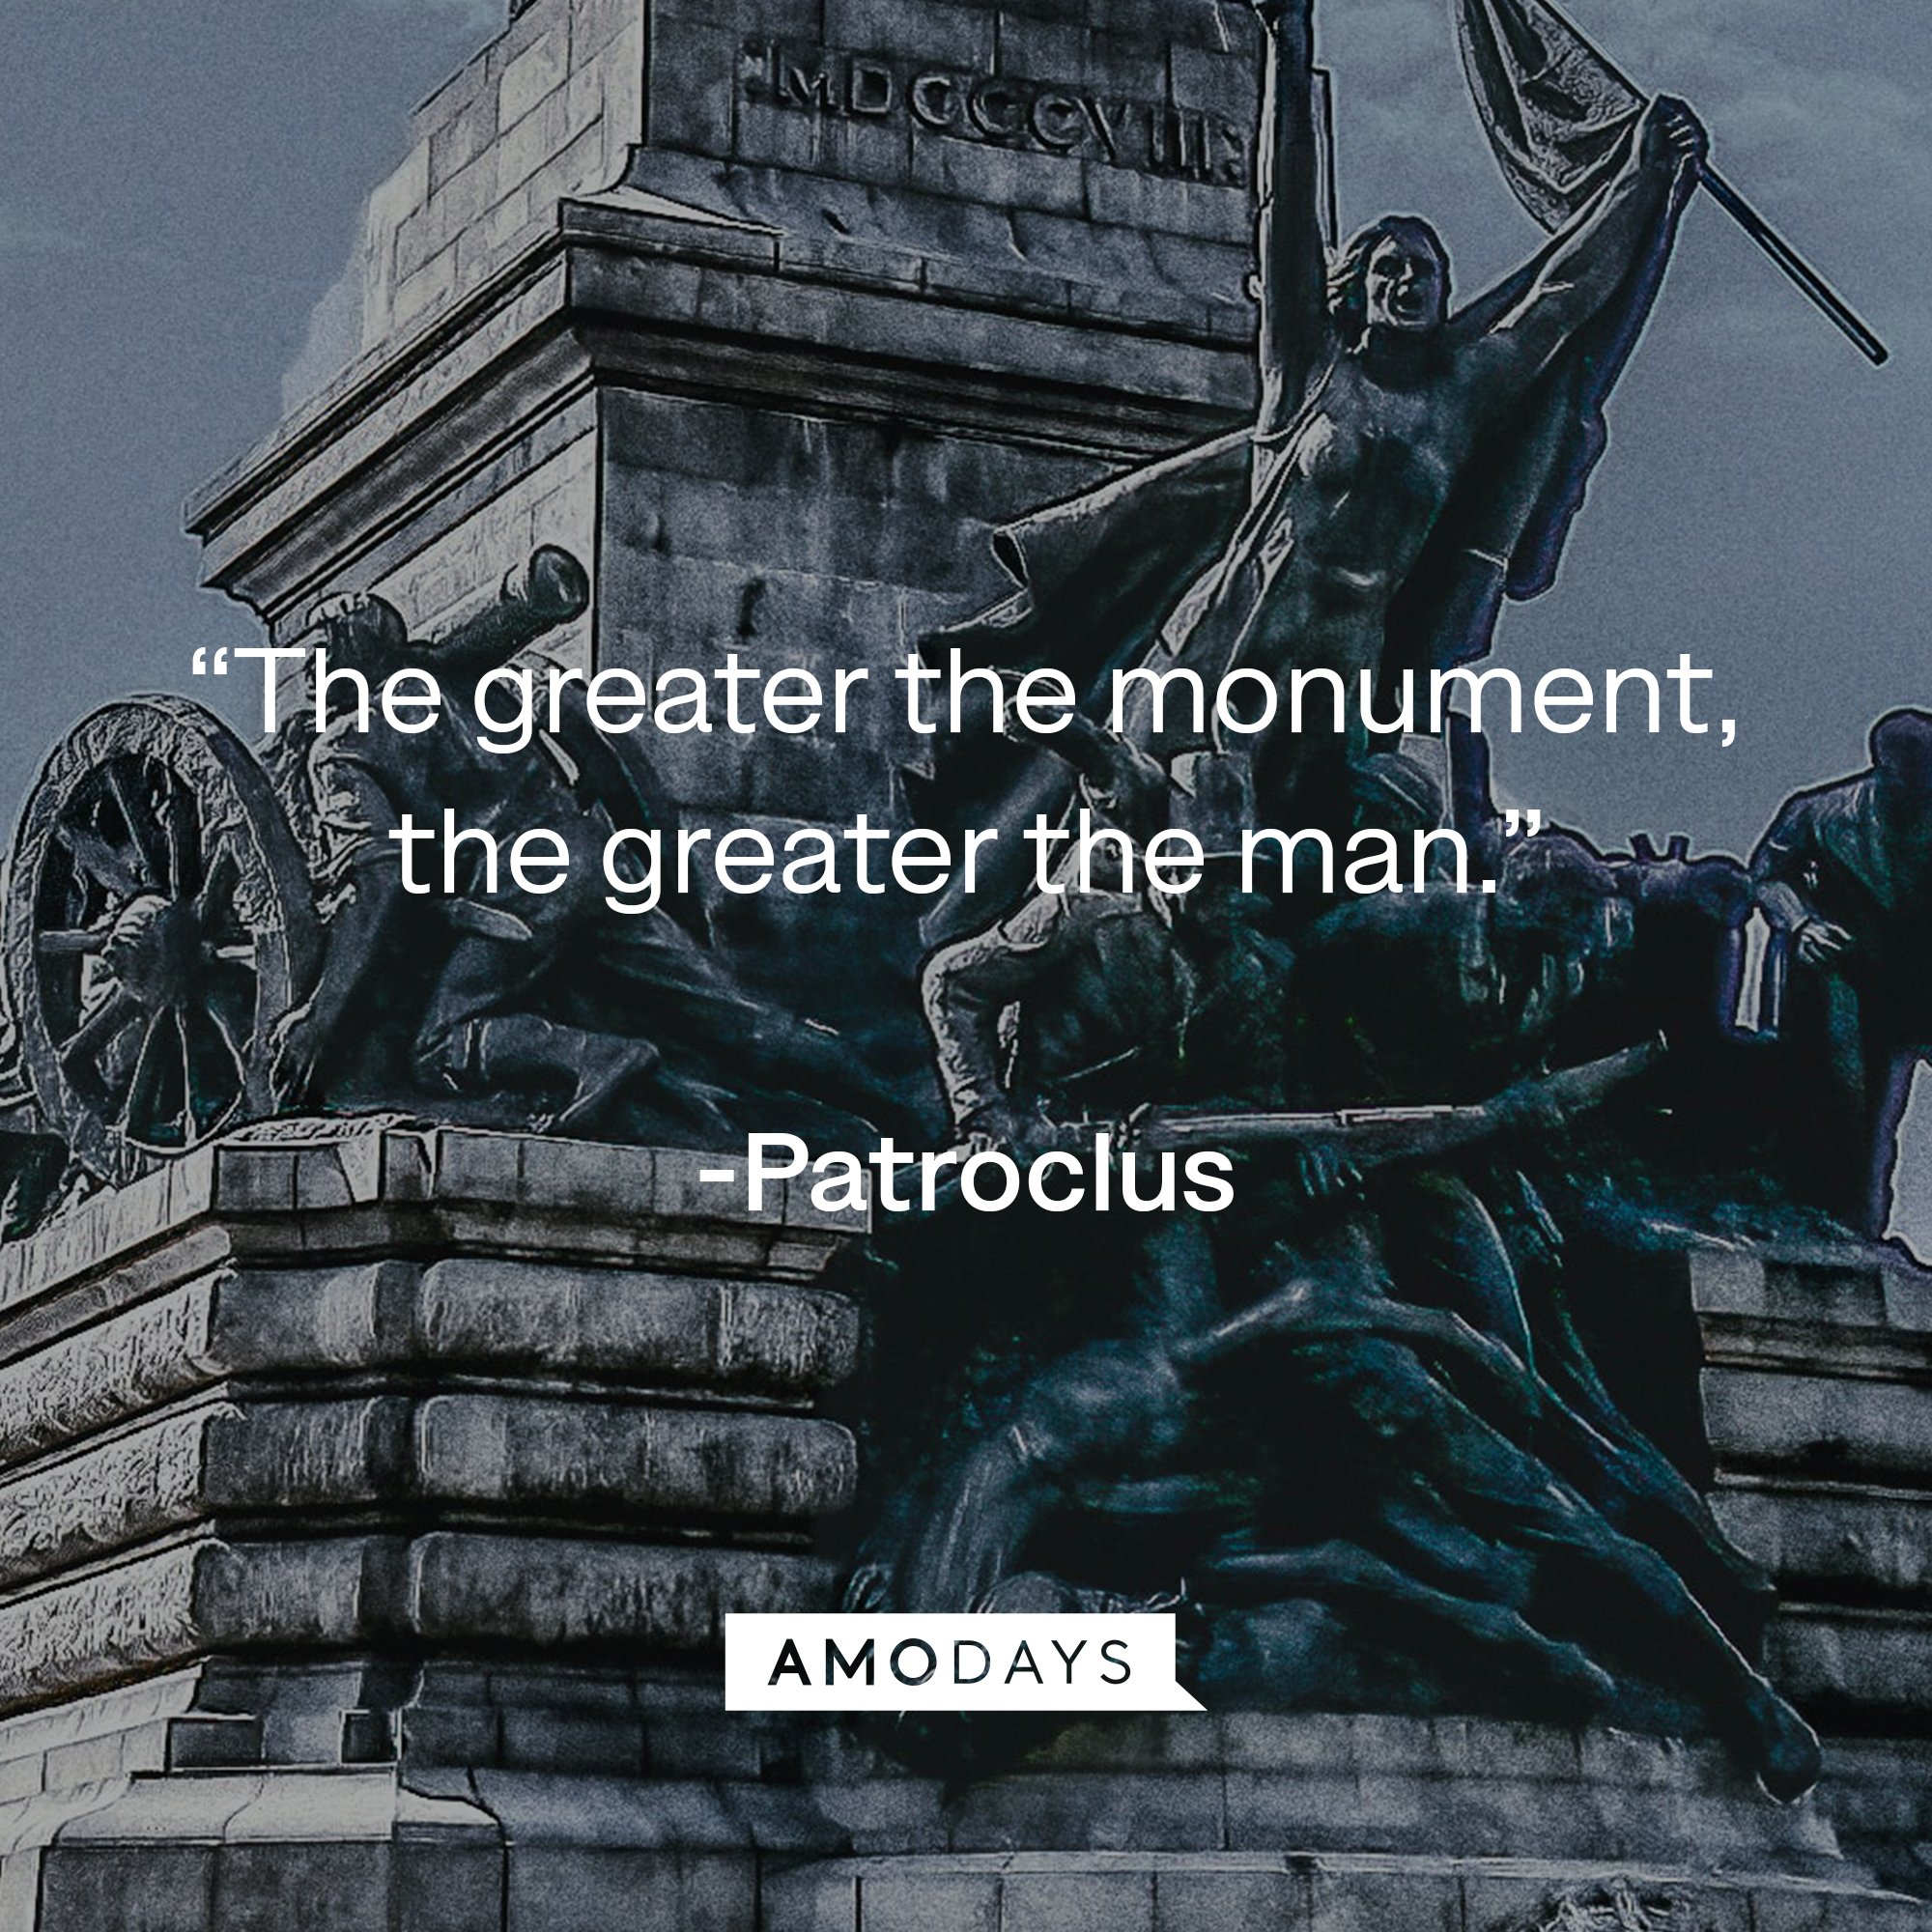 Patroclus's quote: “The greater the monument, the greater the man.” | Image: AmoDays